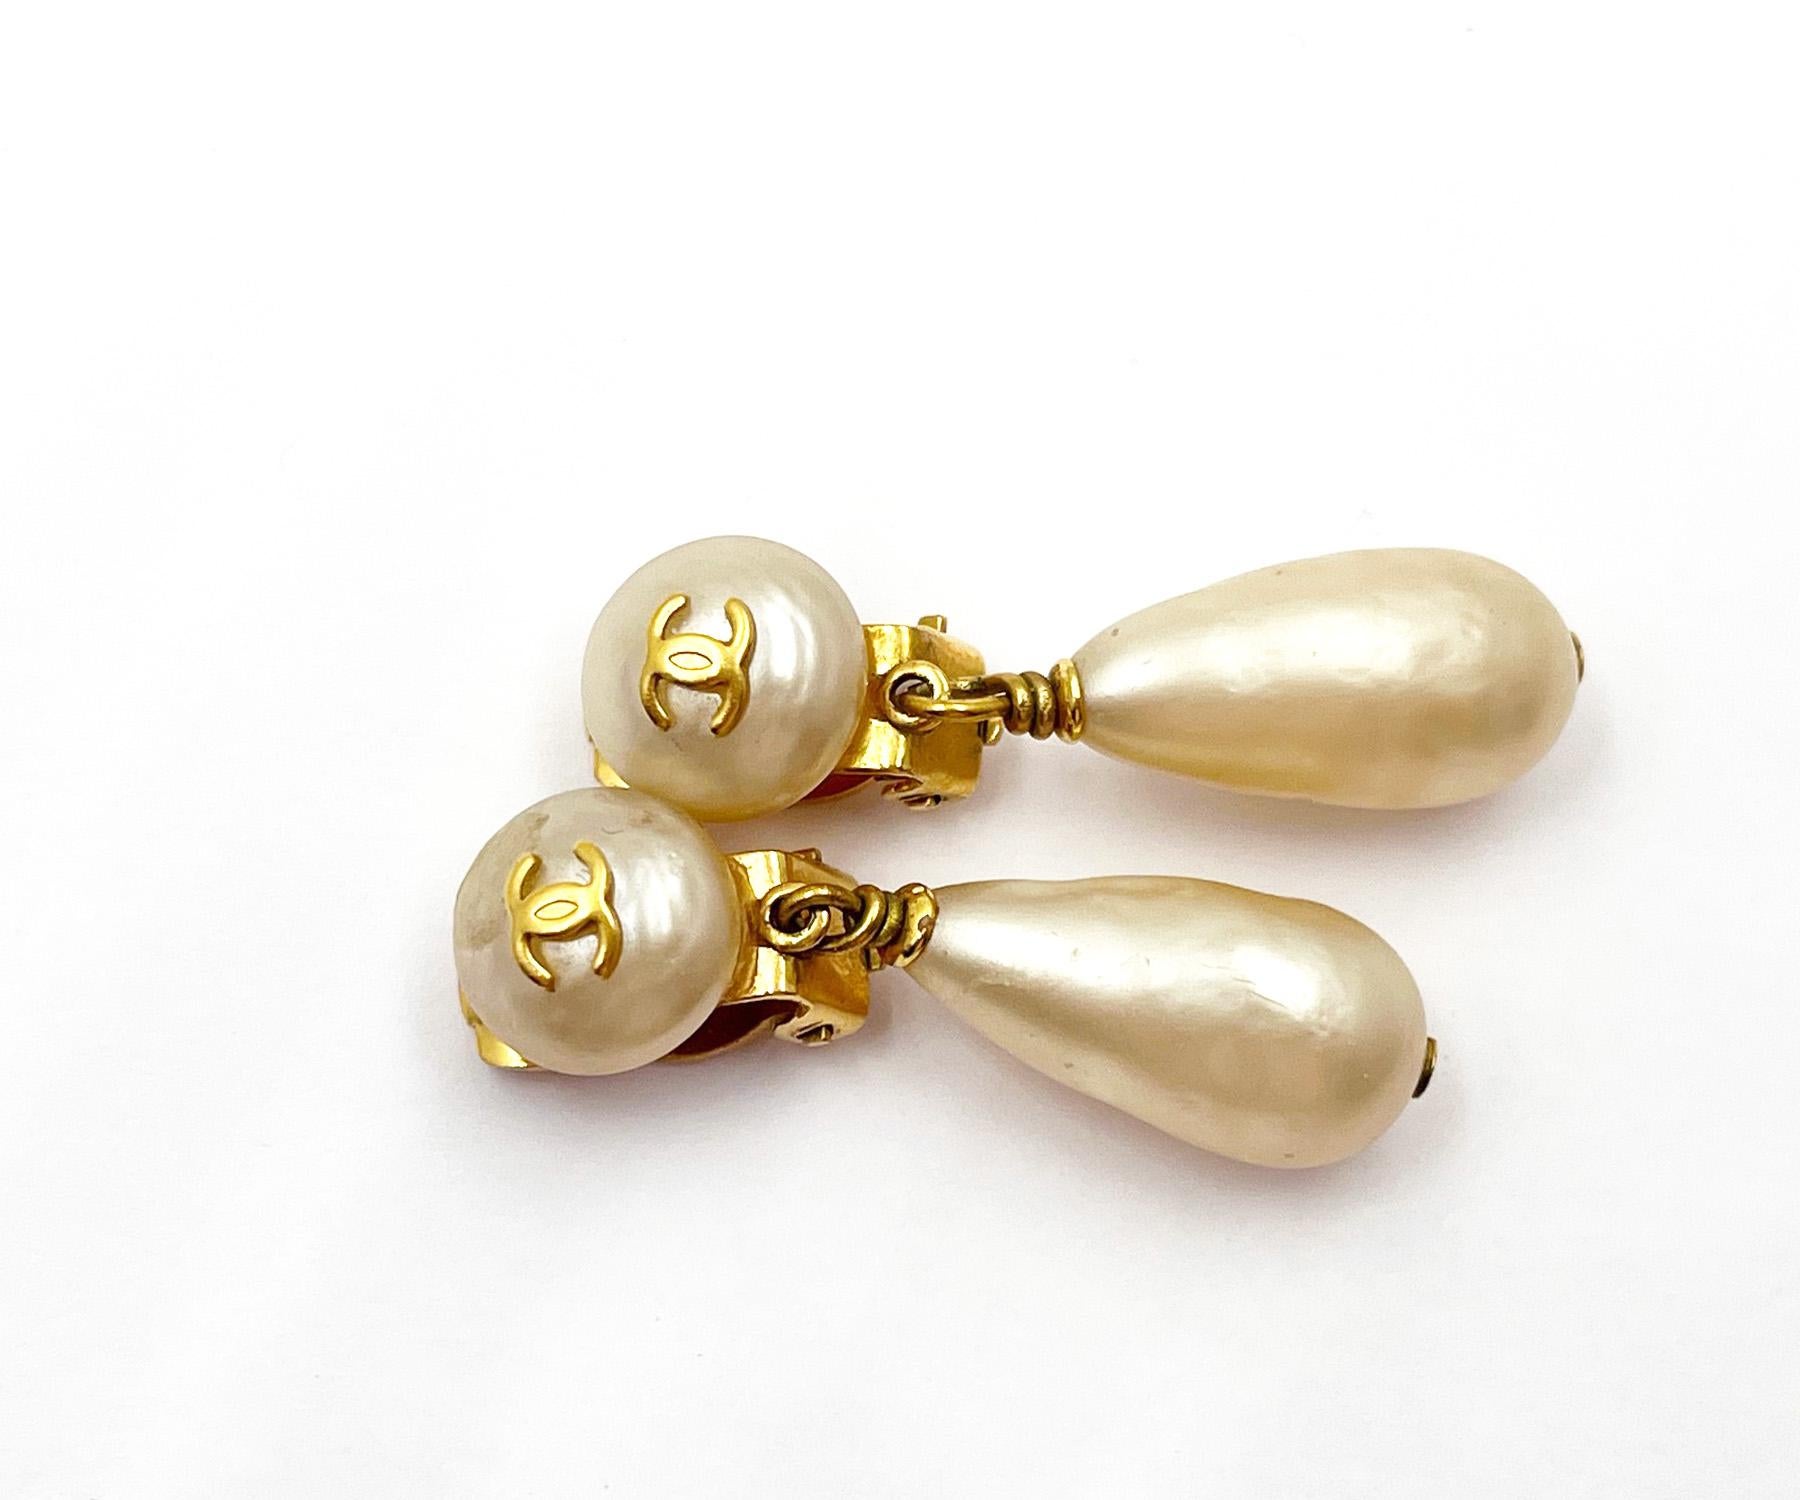 Chanel Vintage Gold Plated CC Pearl Tear Drop Dangle Clip on Earrings

*Marked 28
*Made in France
*Comes with the original box

-Approximately 1.5